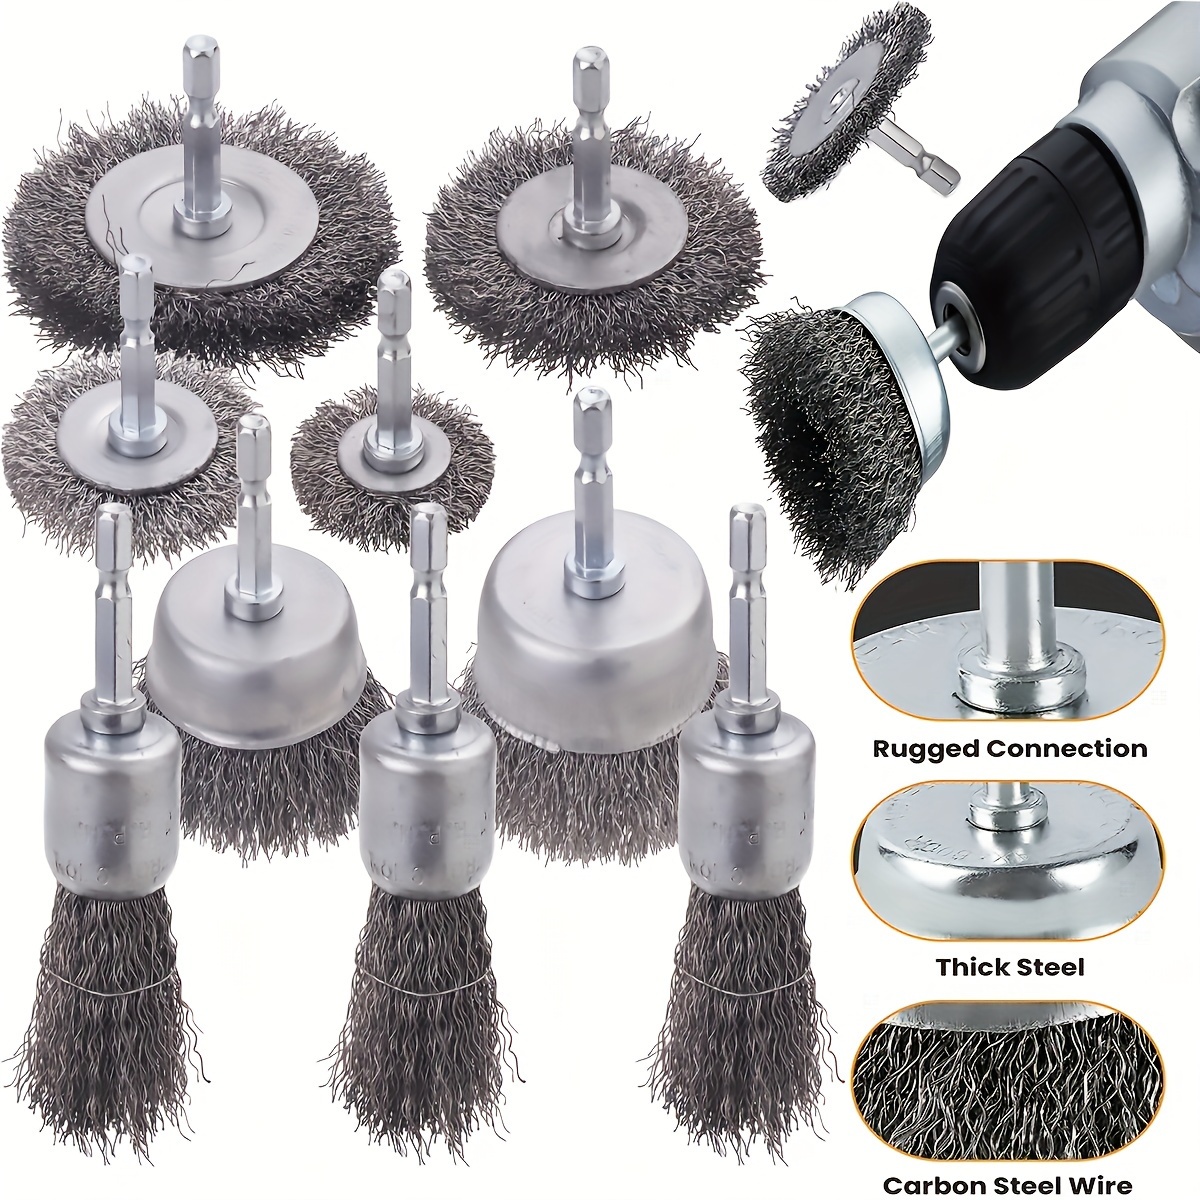 

3pcs Wire Wheel & Cup Brush Set, Drill Attachment With 1/4-inch Hex Shank, Heavy-duty Carbon Steel For Rust Removal, Deburring, Surface Preparation, 3 Sizes (1.3, 2, And 2.5 Inch)